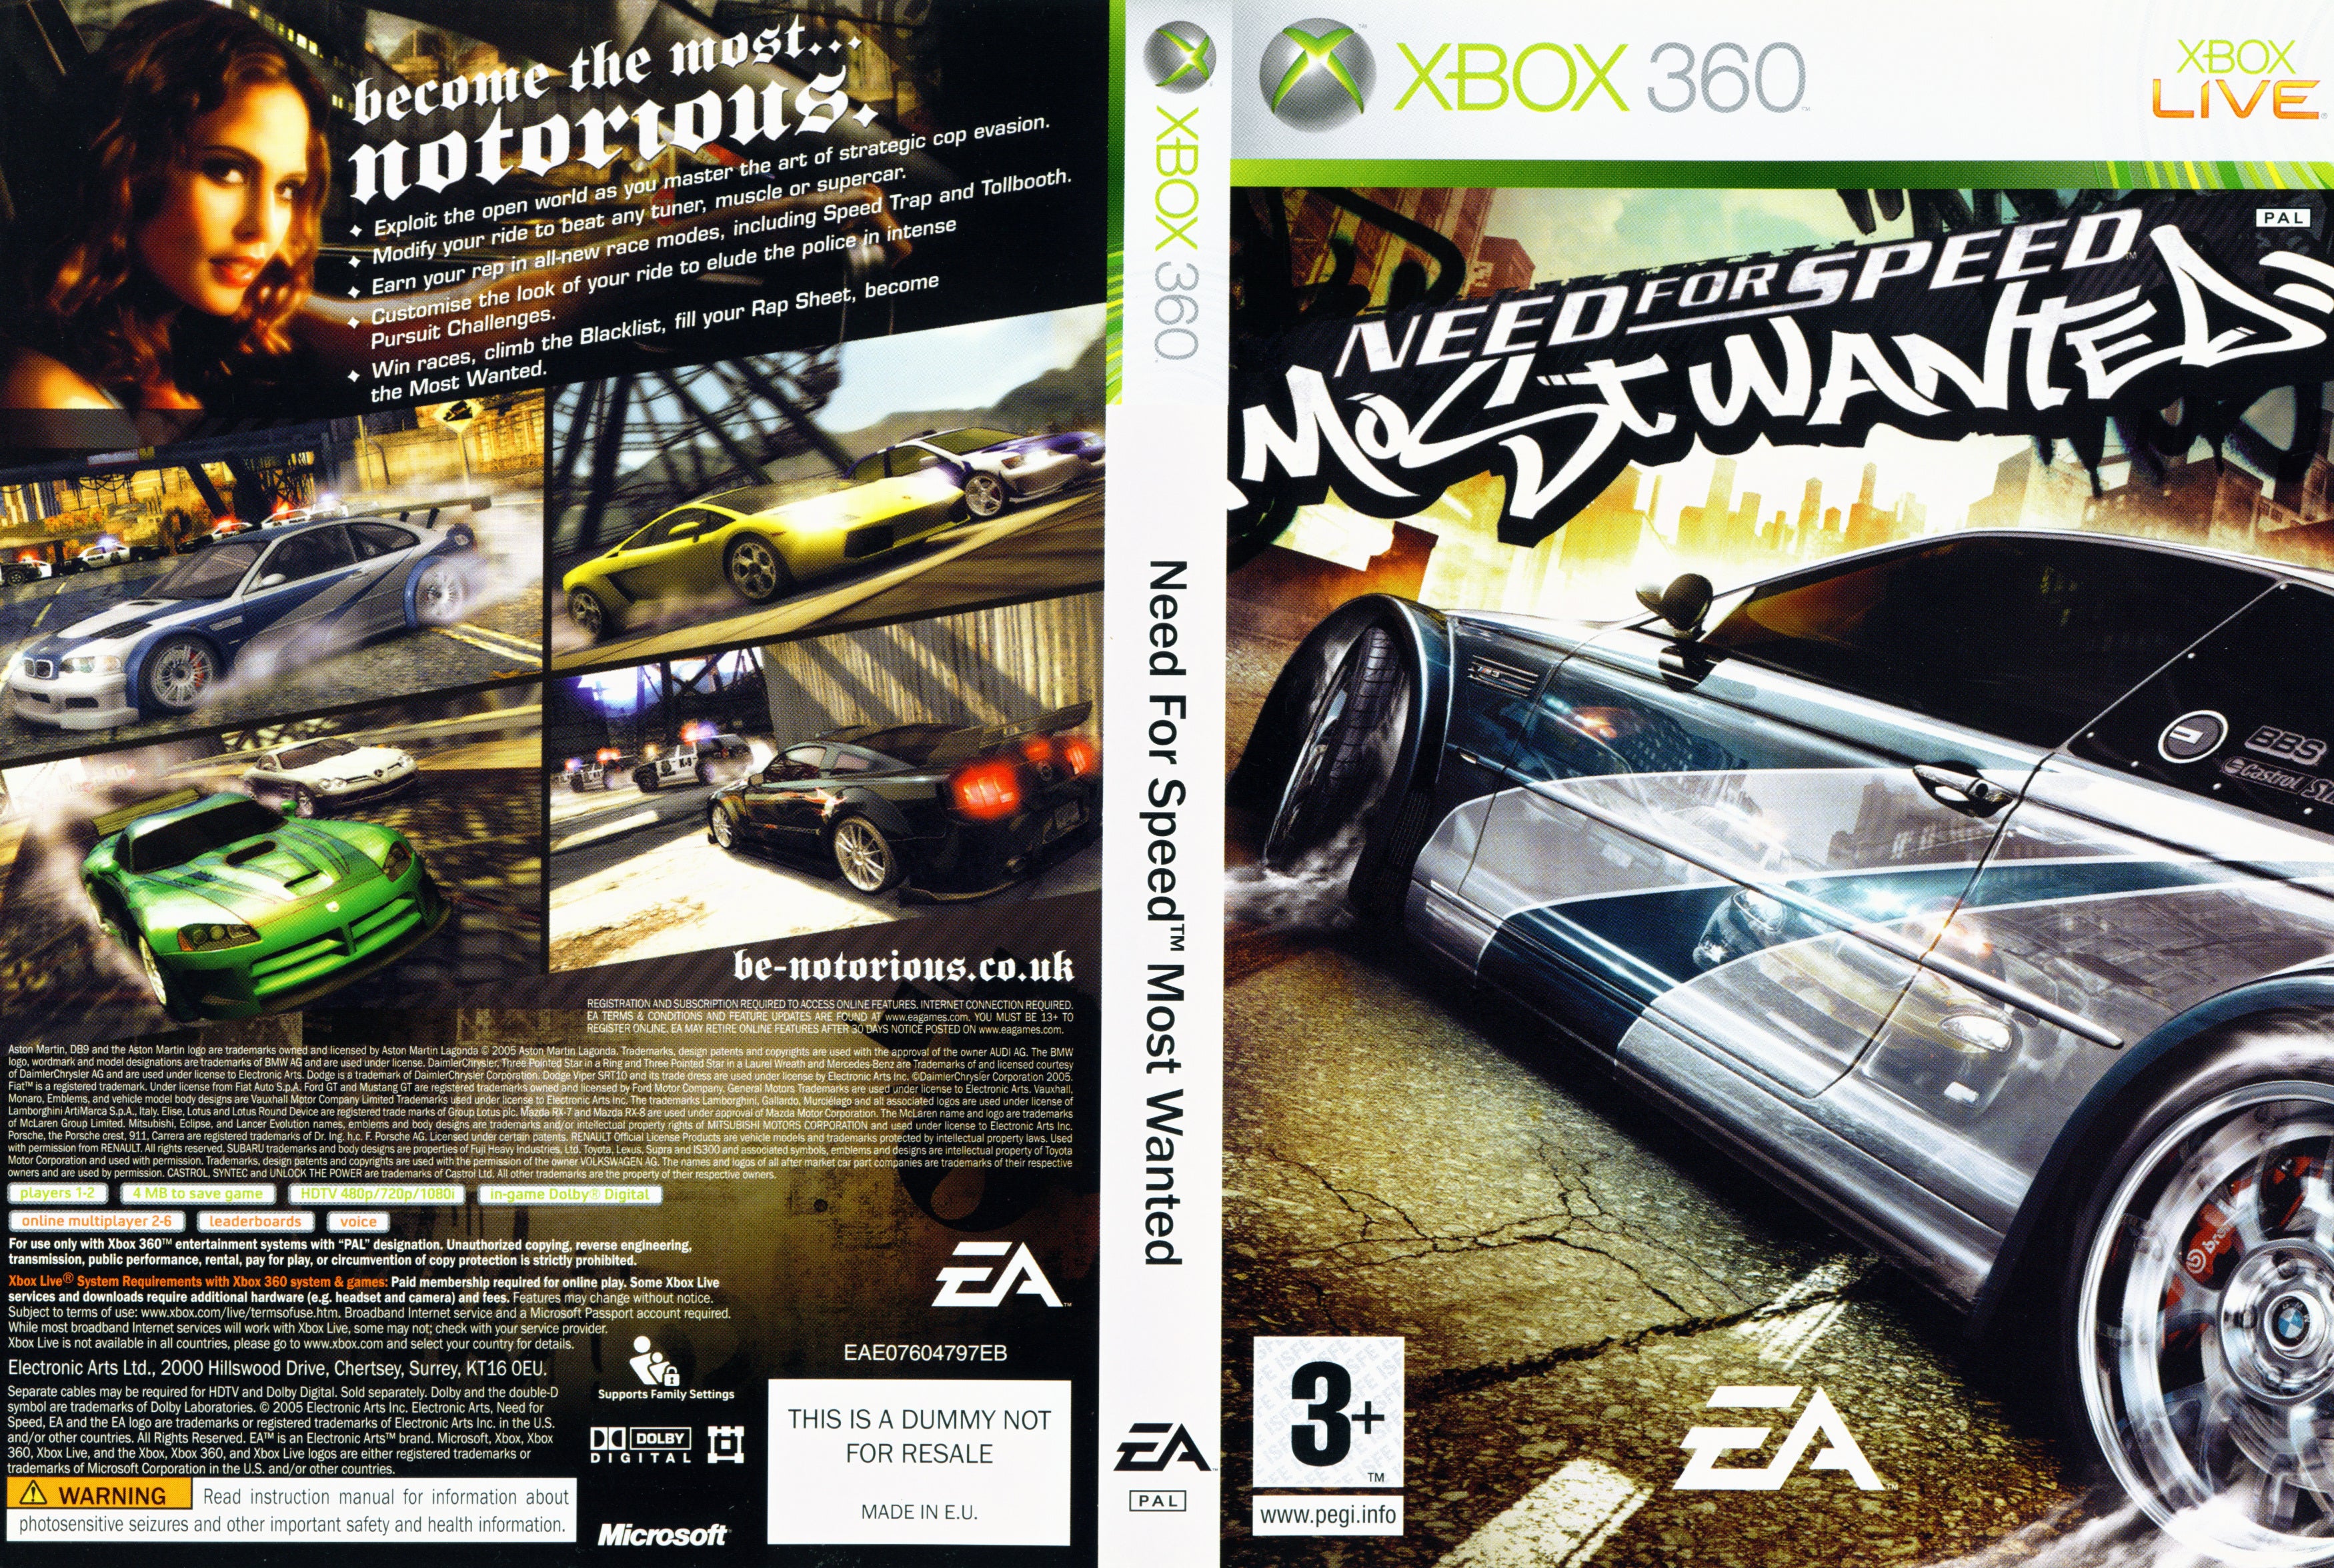 Nfs most wanted xbox. Need for Speed Xbox 360 диск. NFS MW 2005 Xbox 360. Need for Speed most wanted Xbox 360. Need for Speed most wanted Xbox 360 диск.